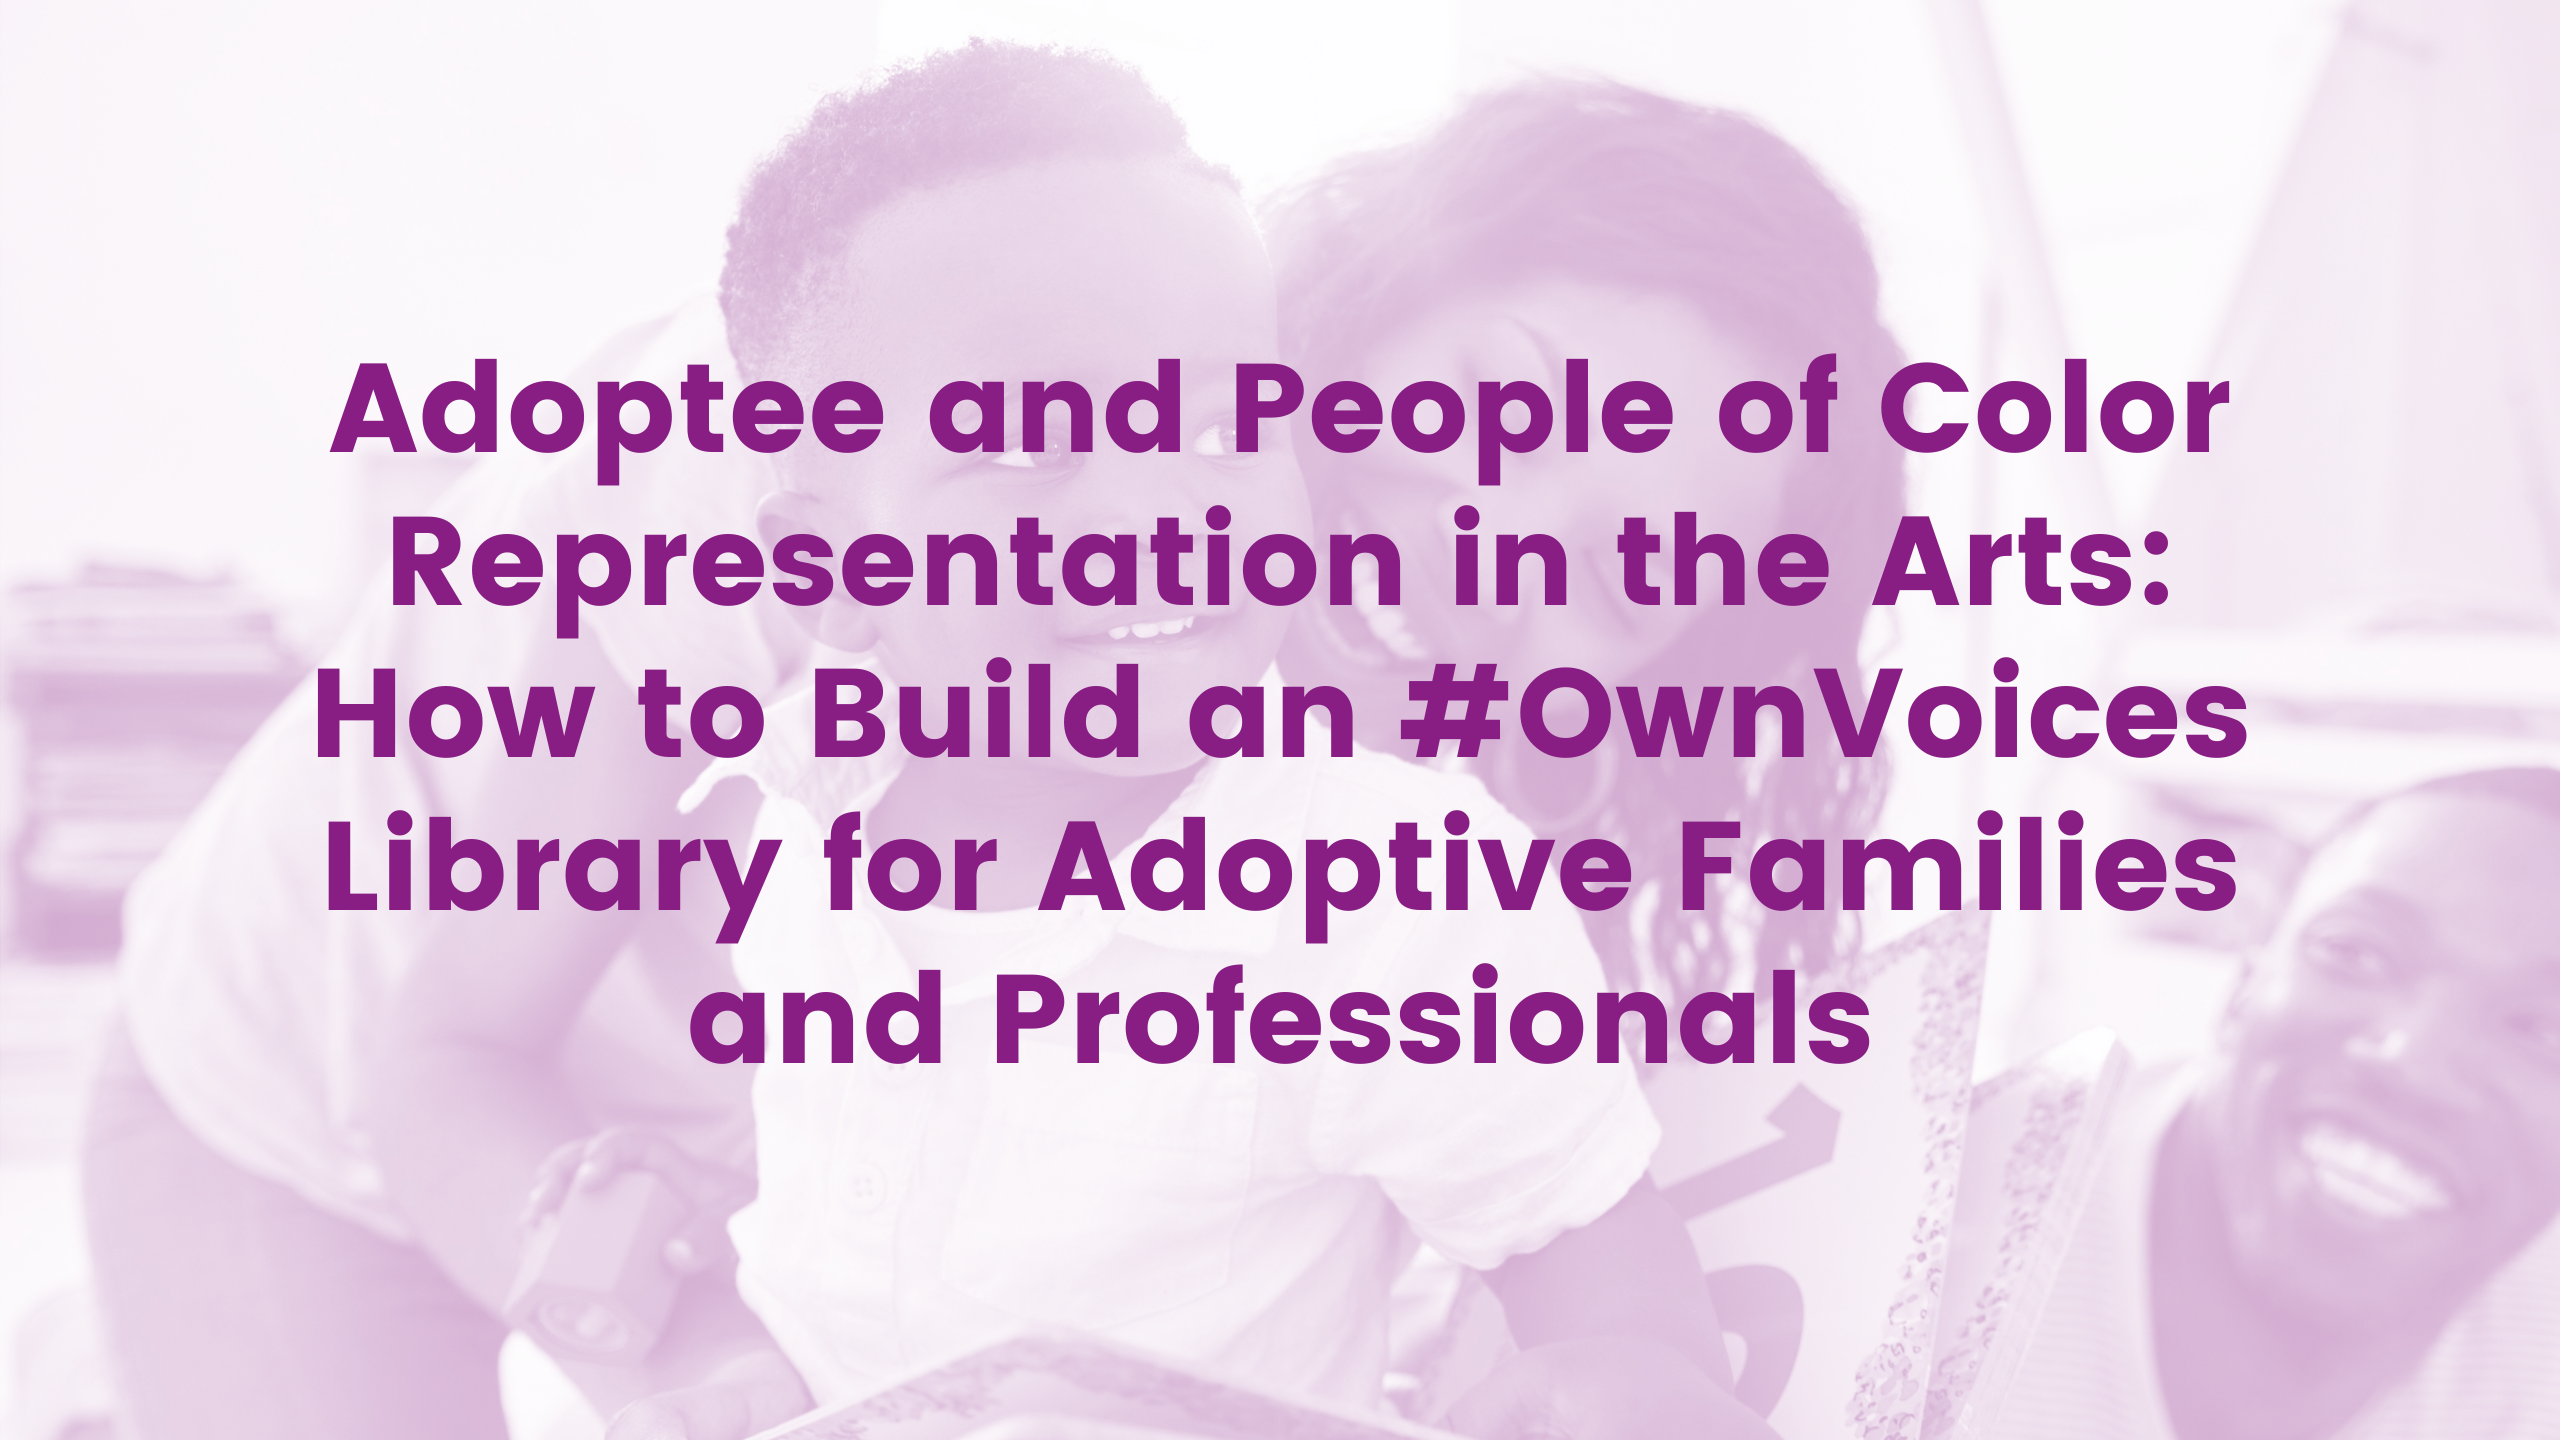 Adoptee and People of Color Representation in the Arts: How to Build an #OwnVoices Library for Adoptive Families and Professionals Webinar